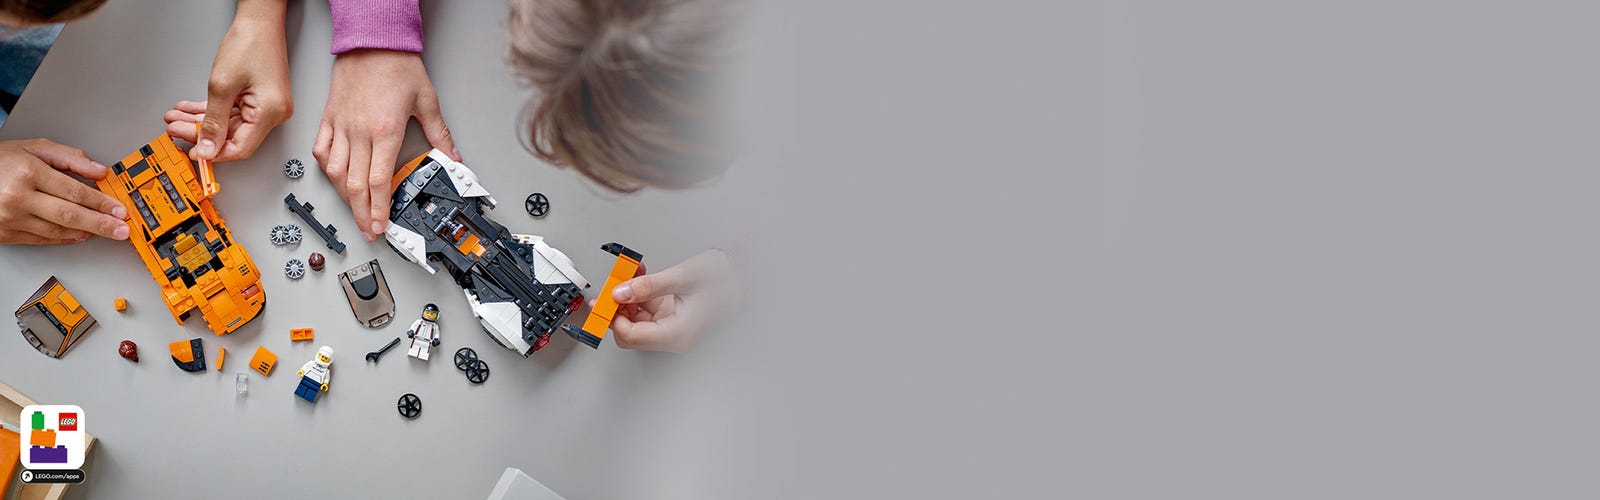 Time to nag your parents: the McLaren F1 LM is now in little Lego